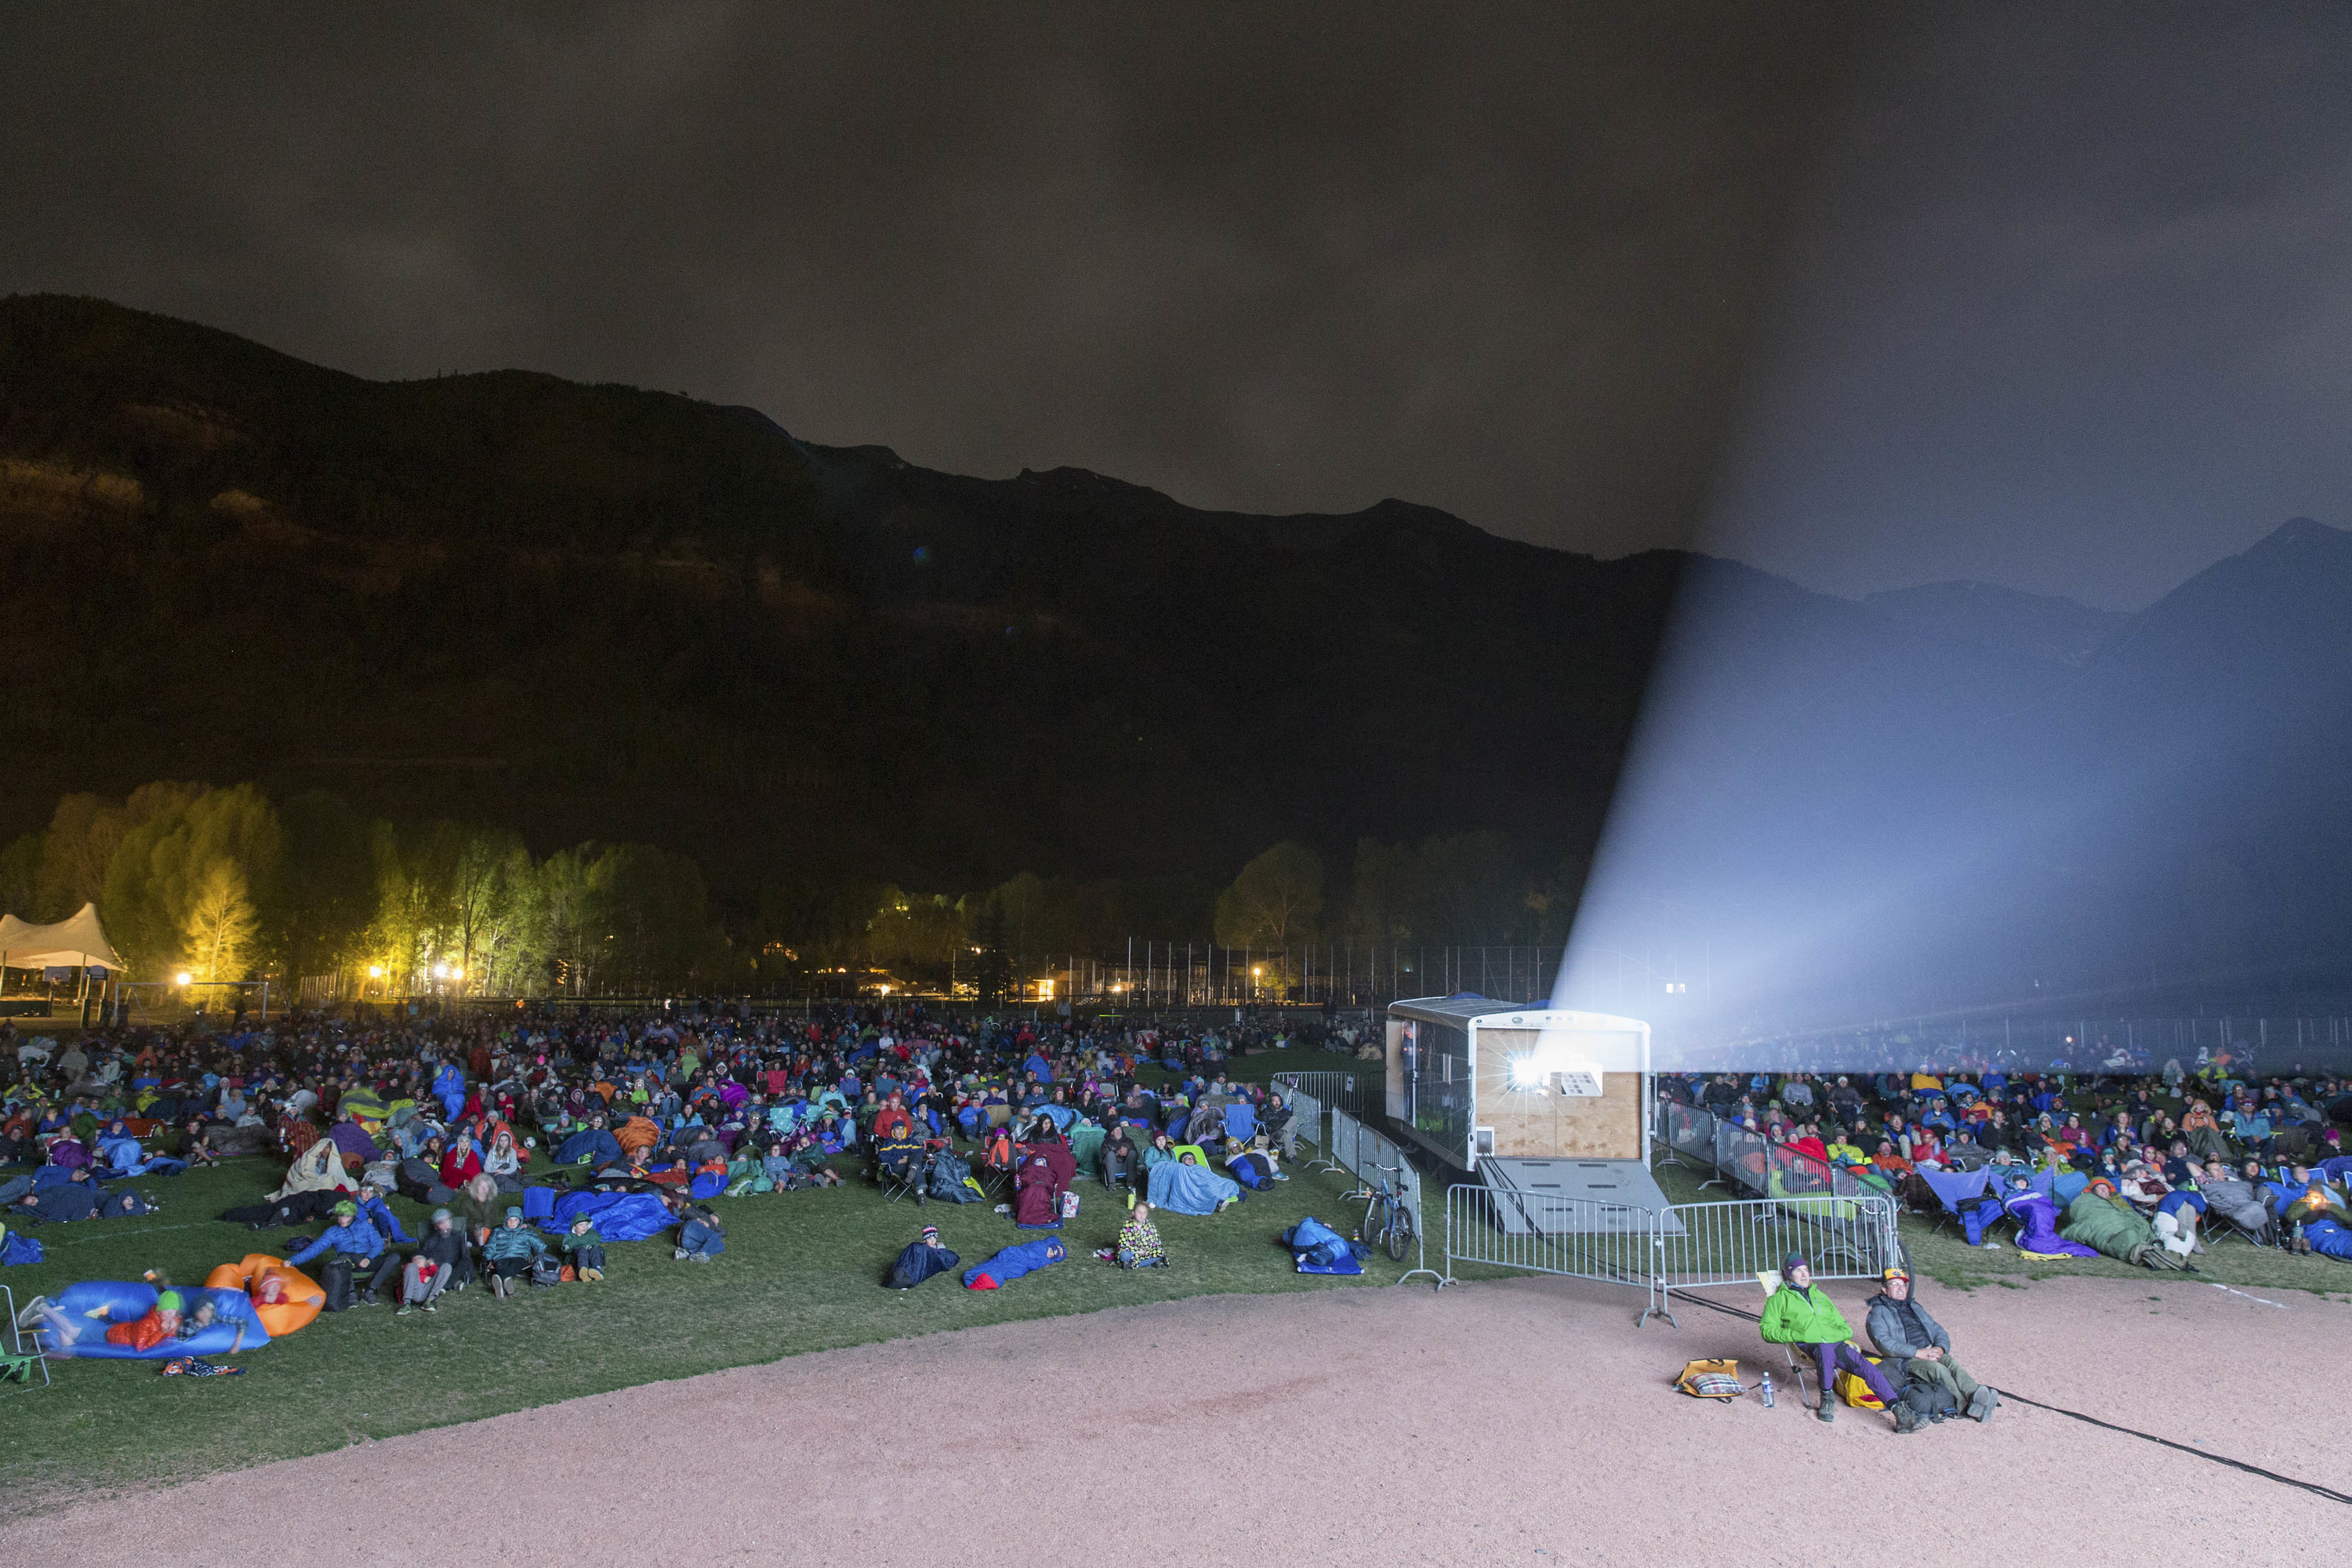 Mountainfilm nixes capacity restrictions at free outdoor venues, adds more seating thanks to new public health orders